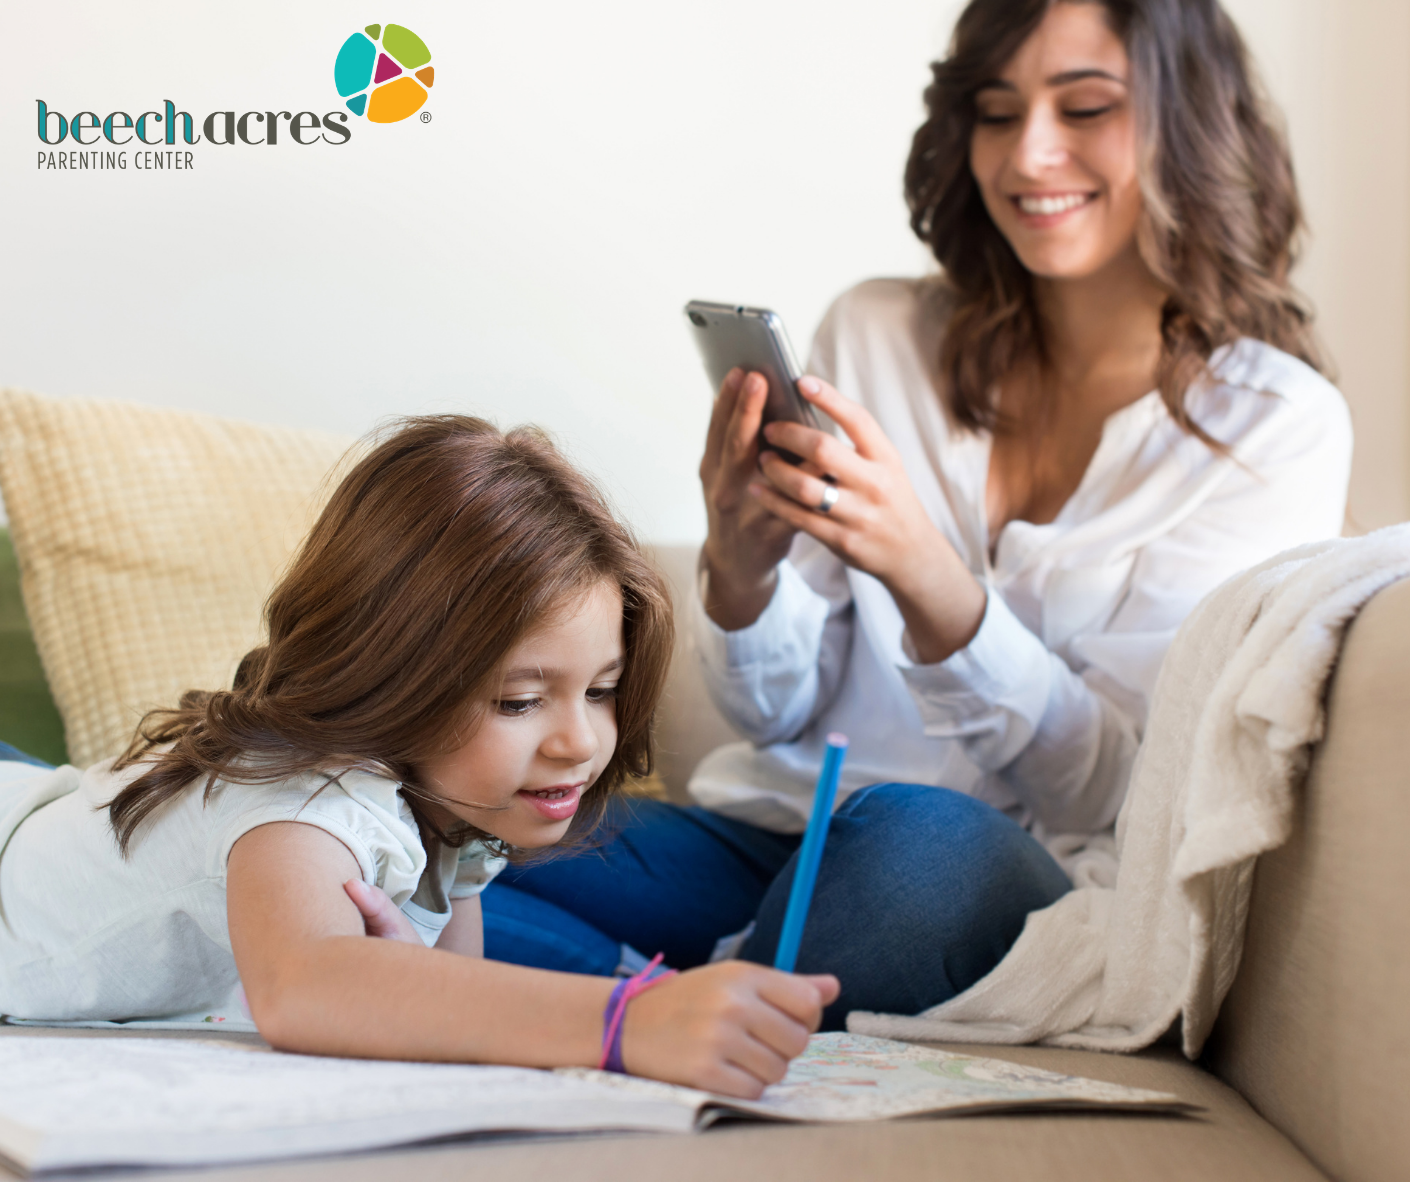 Get Beech Acres Parenting Center Parenting Courses Delivered Right to Your Phone